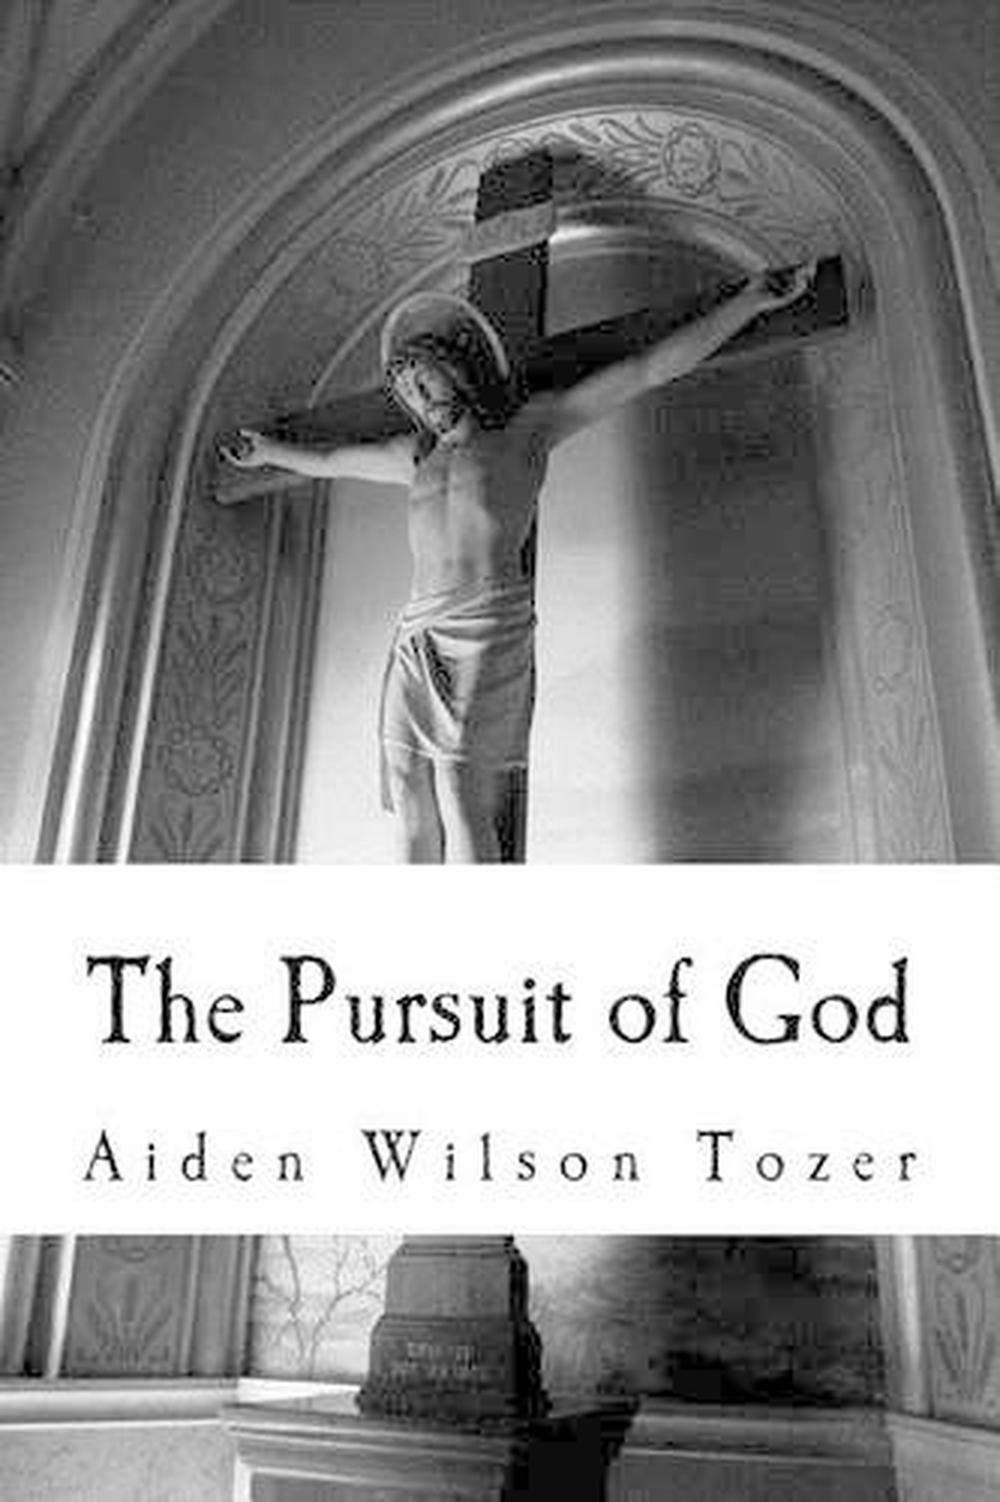 the pursuit of god aw tozer review